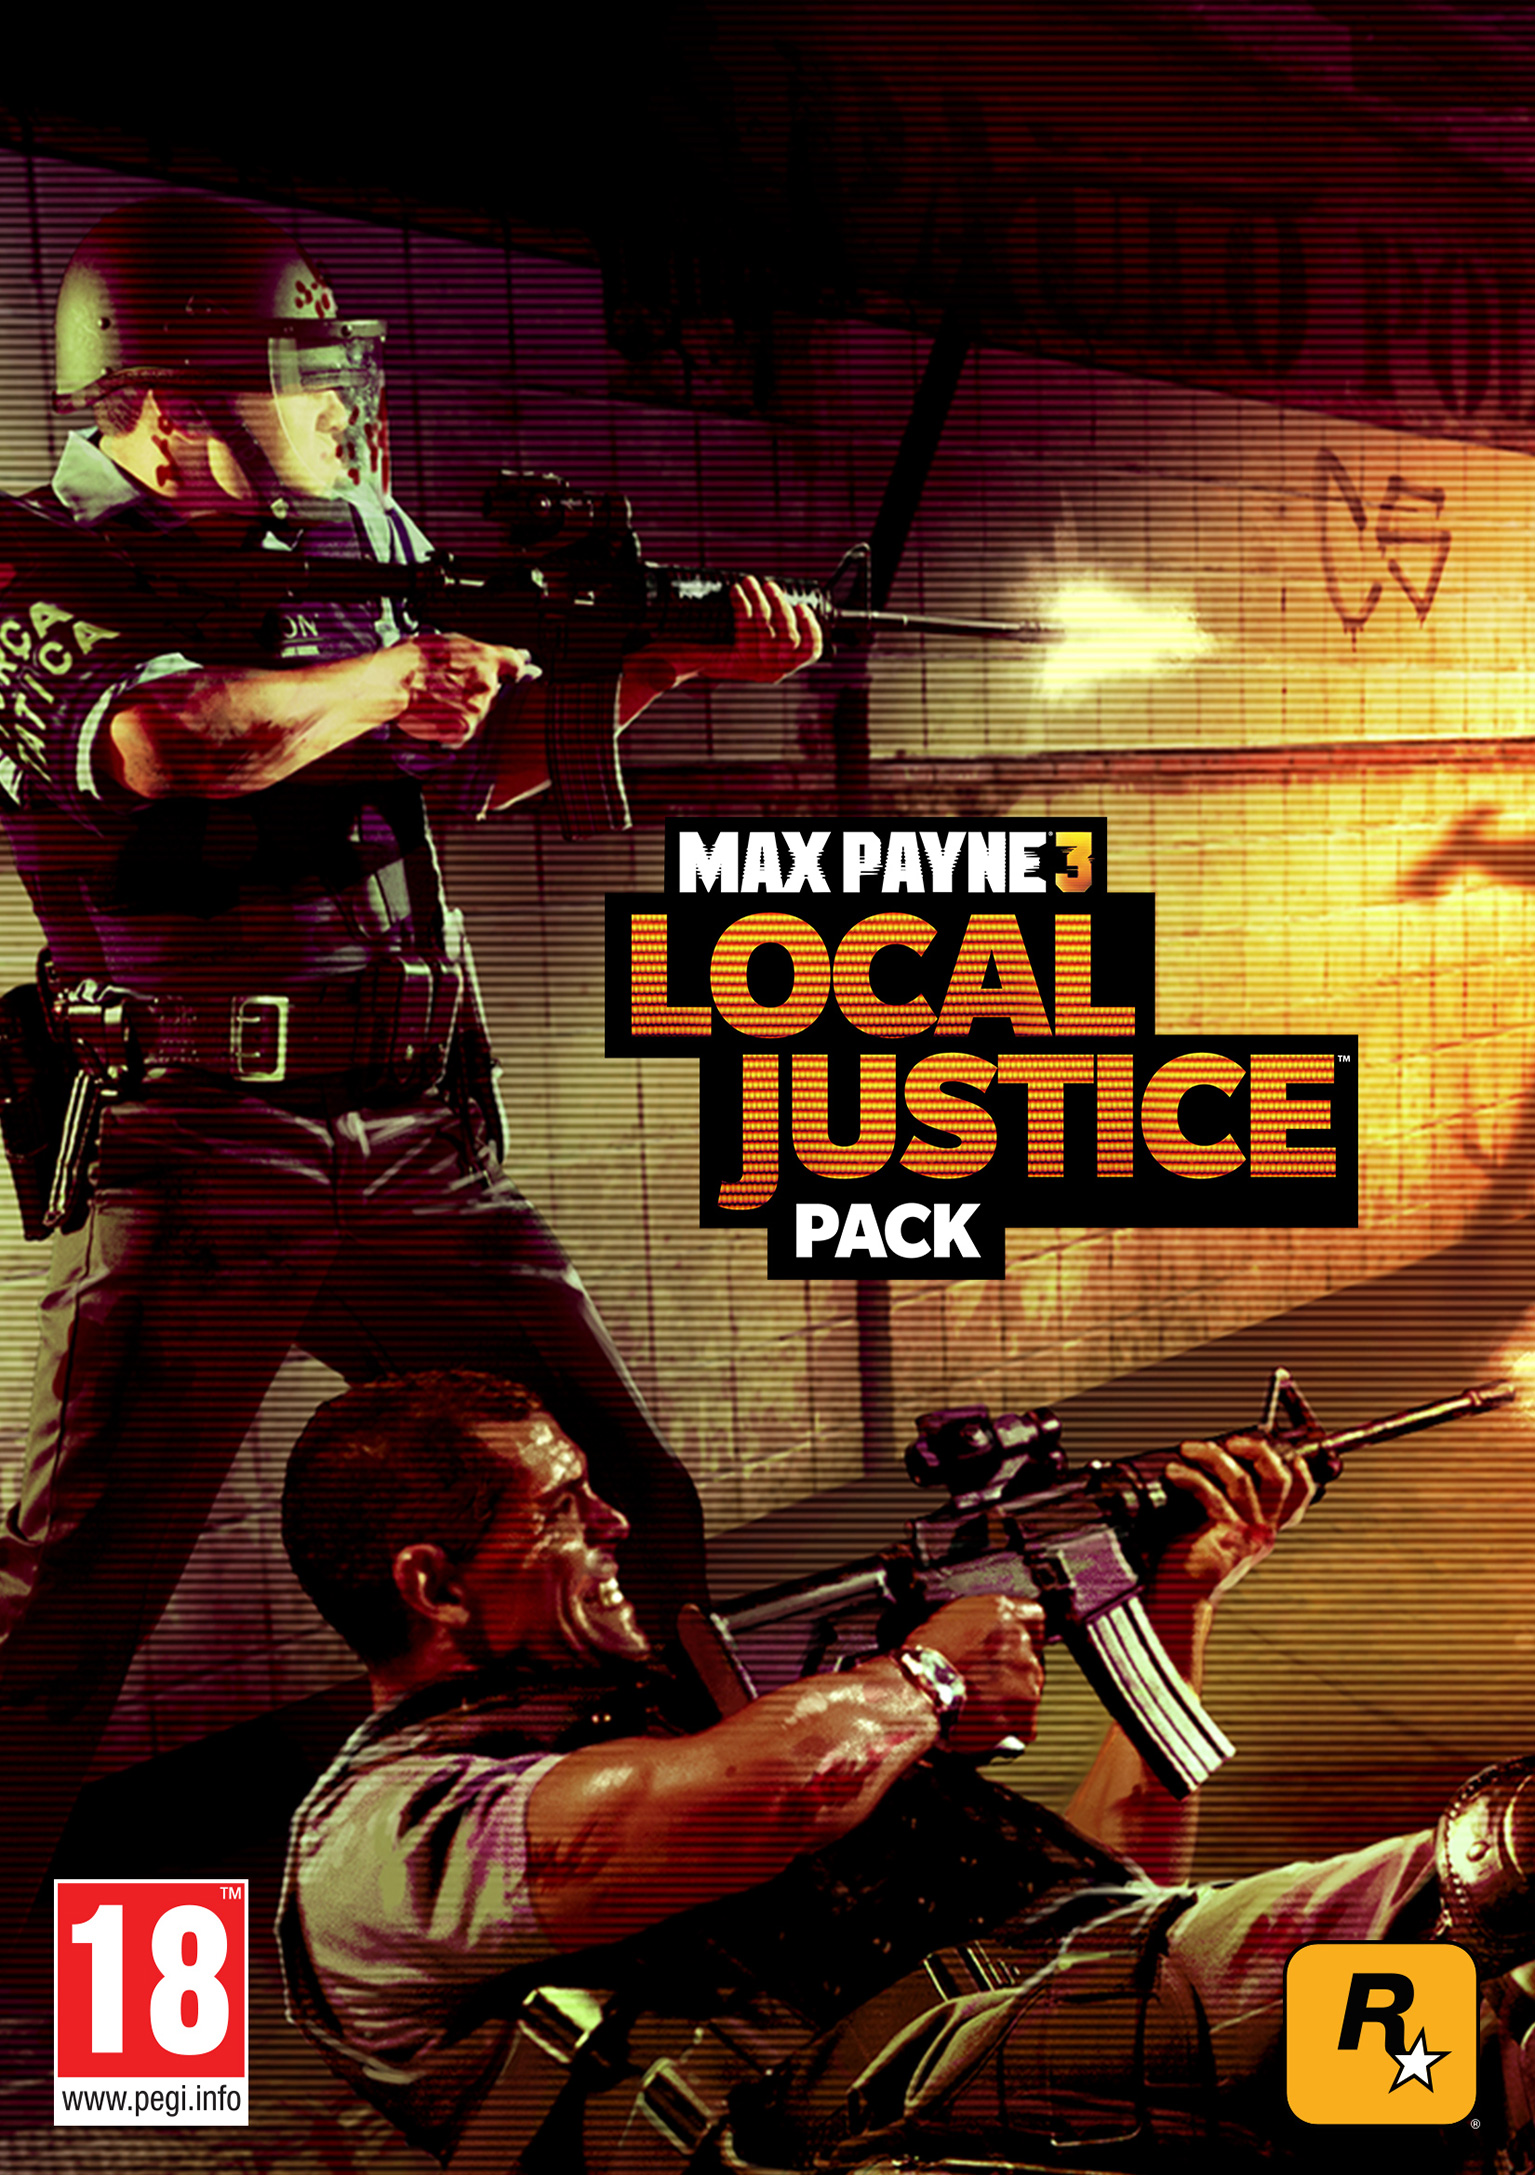 Max Payne 3: Local Justice Pack - pedn DVD obal